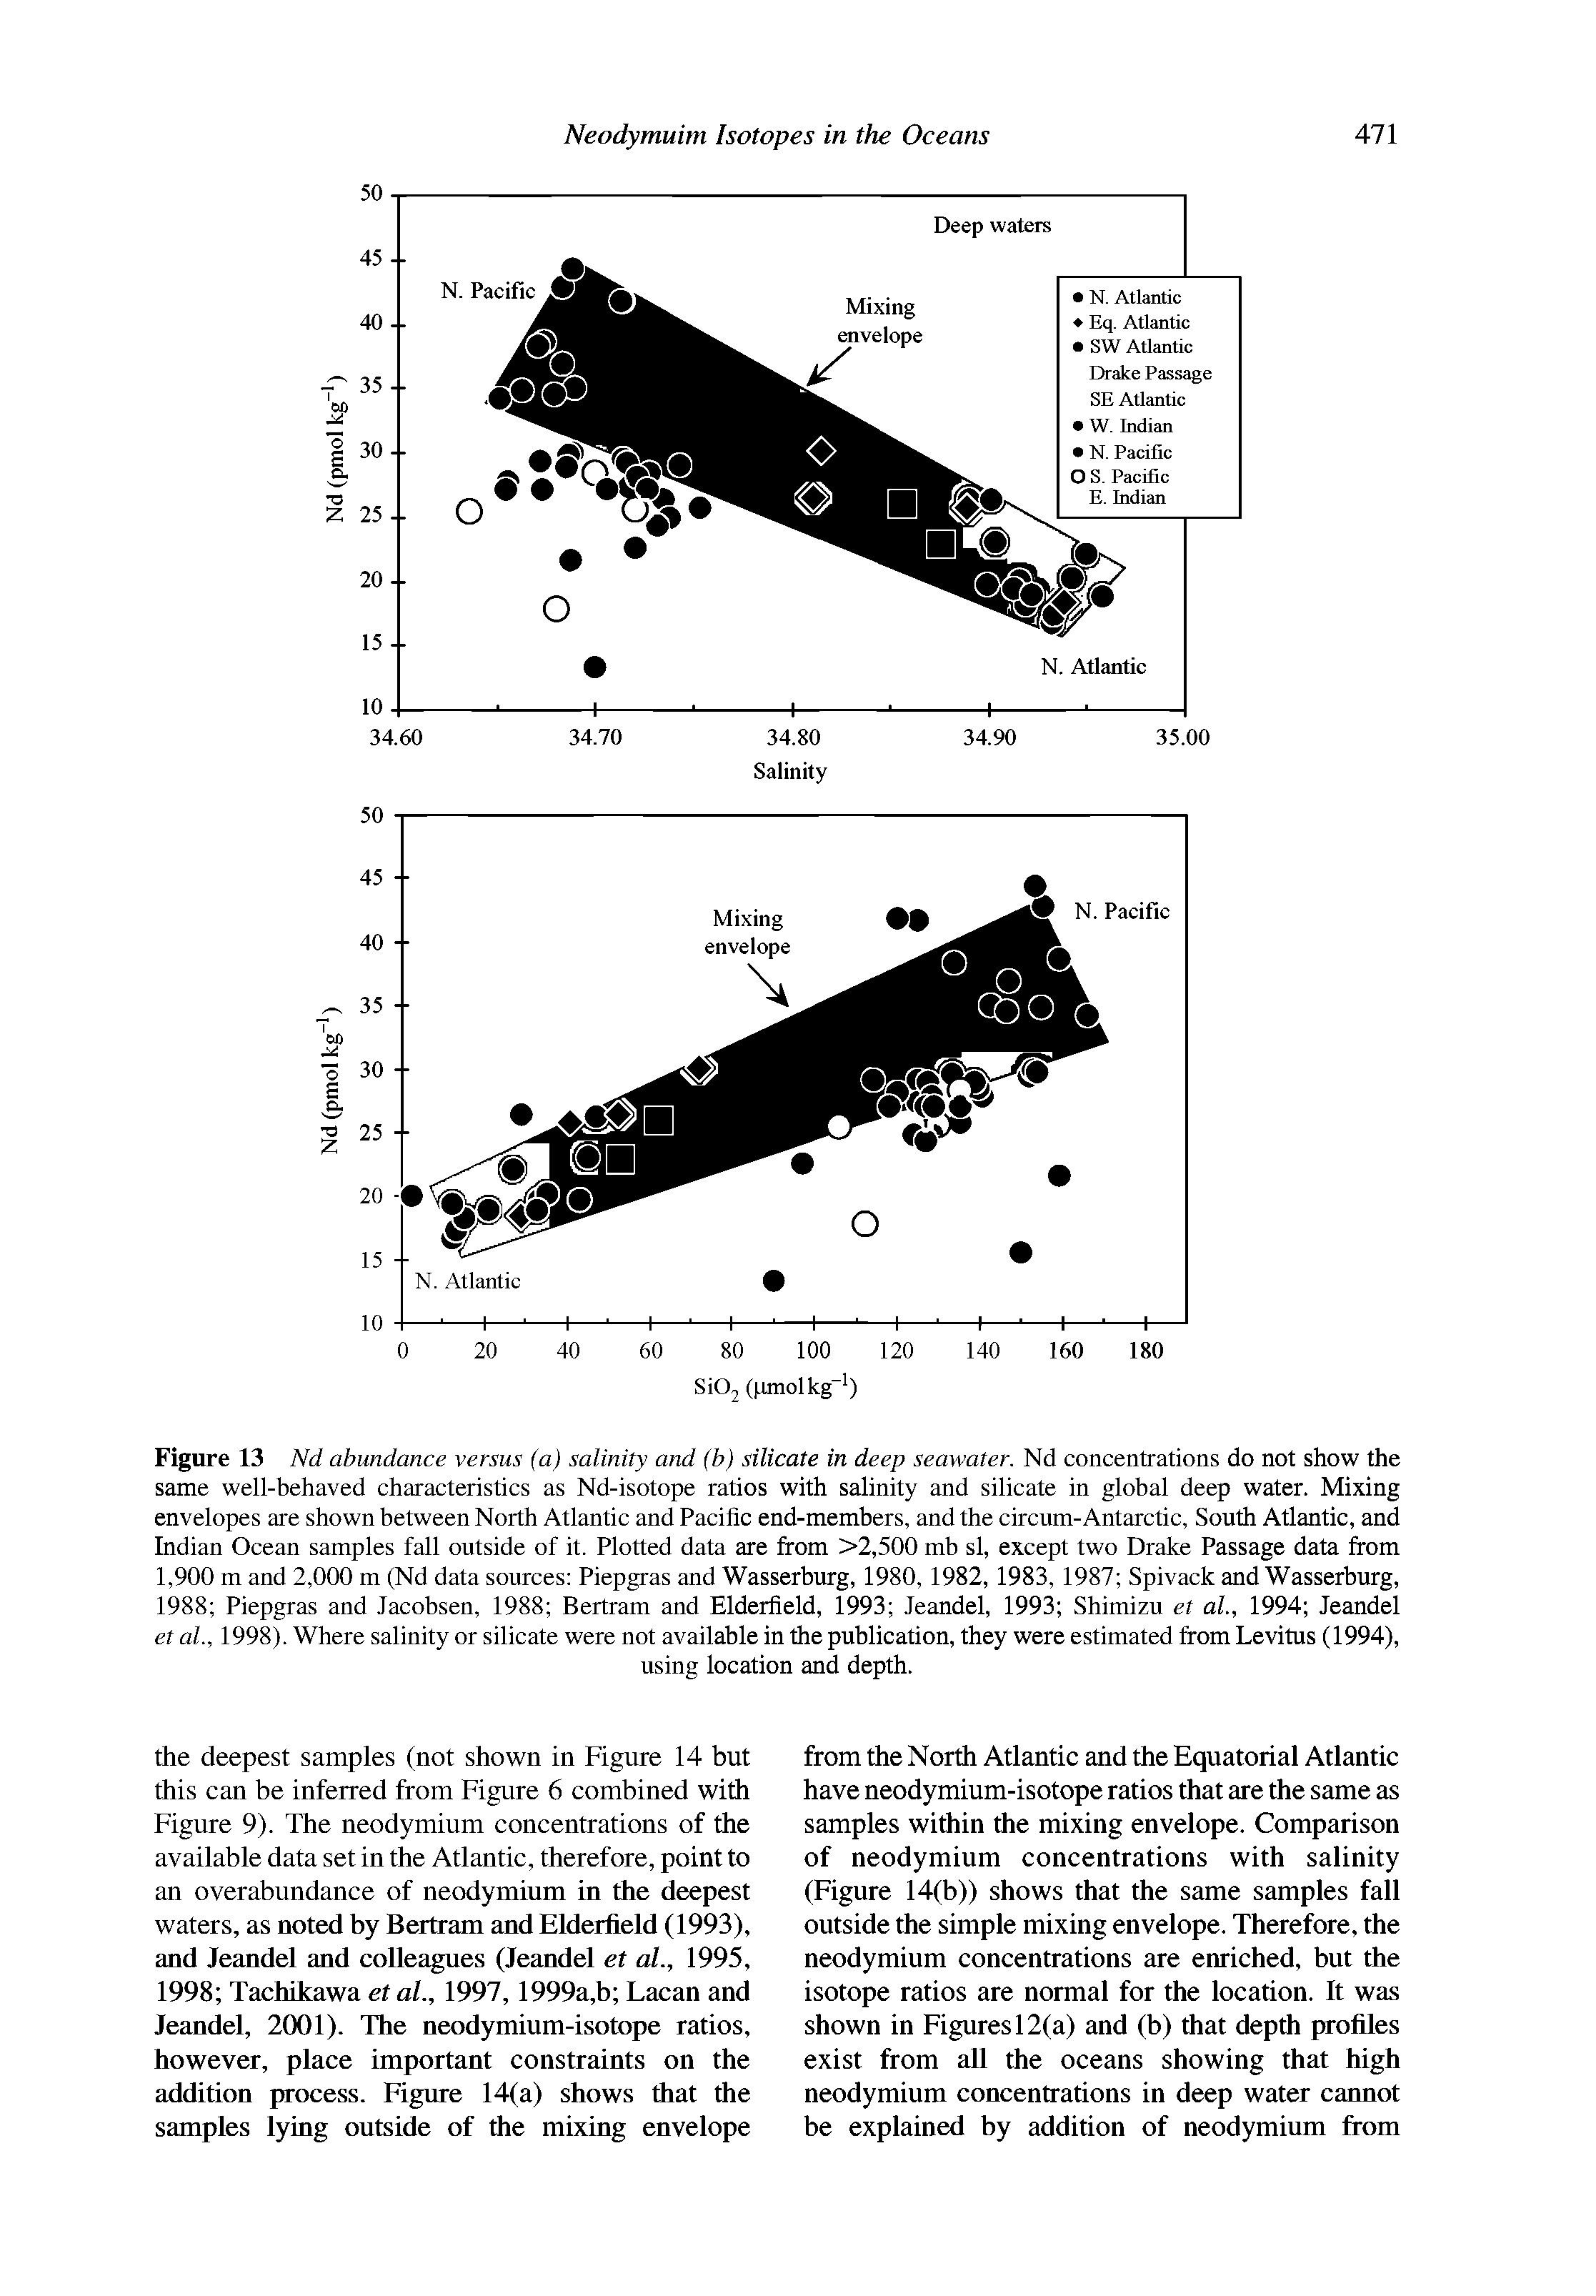 Figure 13 Nd abundance versus (a) salinity and (b) silicate in deep seawater. Nd concentrations do not show the same well-behaved characteristics as Nd-isotope ratios with salinity and silicate in global deep water. Mixing envelopes are shown between North Atlantic and Pacific end-members, and the circum-Antarctic, South Atlantic, and Indian Ocean samples fall outside of it. Plotted data are from >2,500 mb si, except two Drake Passage data from 1,900 m and 2,000 m (Nd data sources Piepgras and Wasserburg, 1980, 1982, 1983, 1987 Spivack and Wasserburg, 1988 Piepgras and Jacobsen, 1988 Bertram and Elderfield, 1993 Jeandel, 1993 Shimizu et al., 1994 Jeandel et ah, 1998). Where salinity or silicate were not available in the publication, they were estimated from Levitus (1994),...